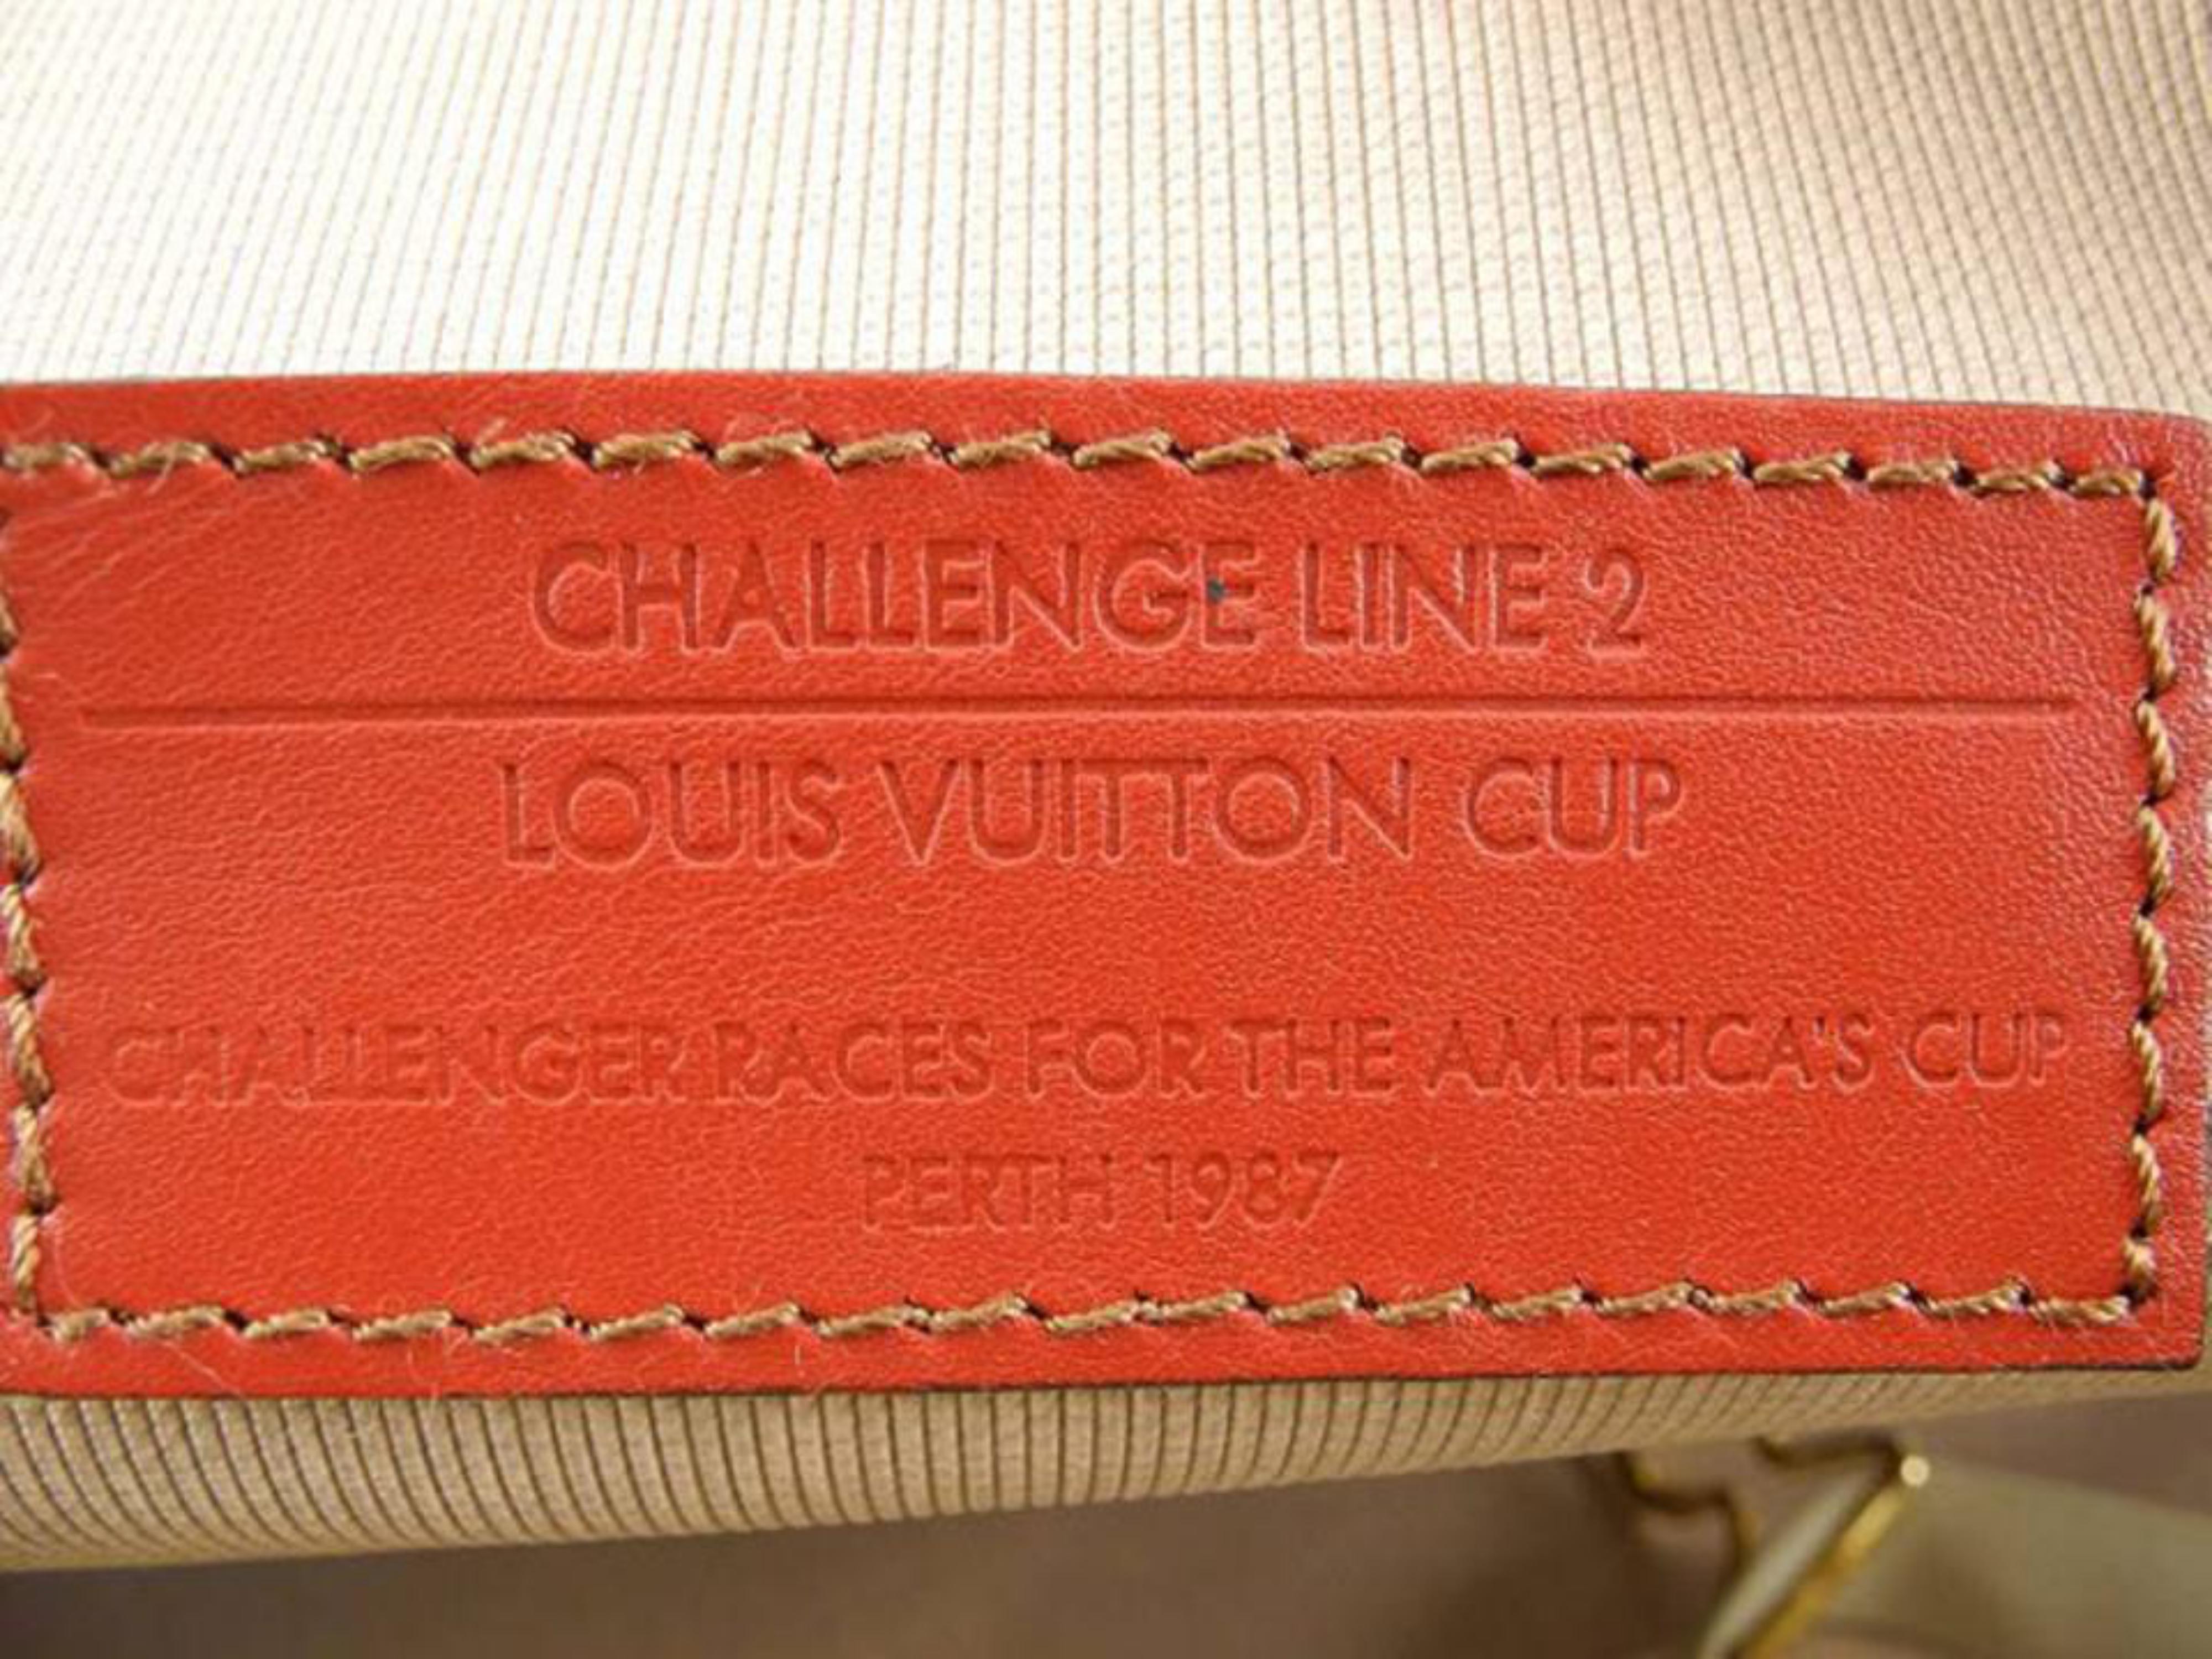 Louis Vuitton (1987 Cup ) Challenge Boston 221140 Red Leather Weekend/Travel Bag For Sale 2